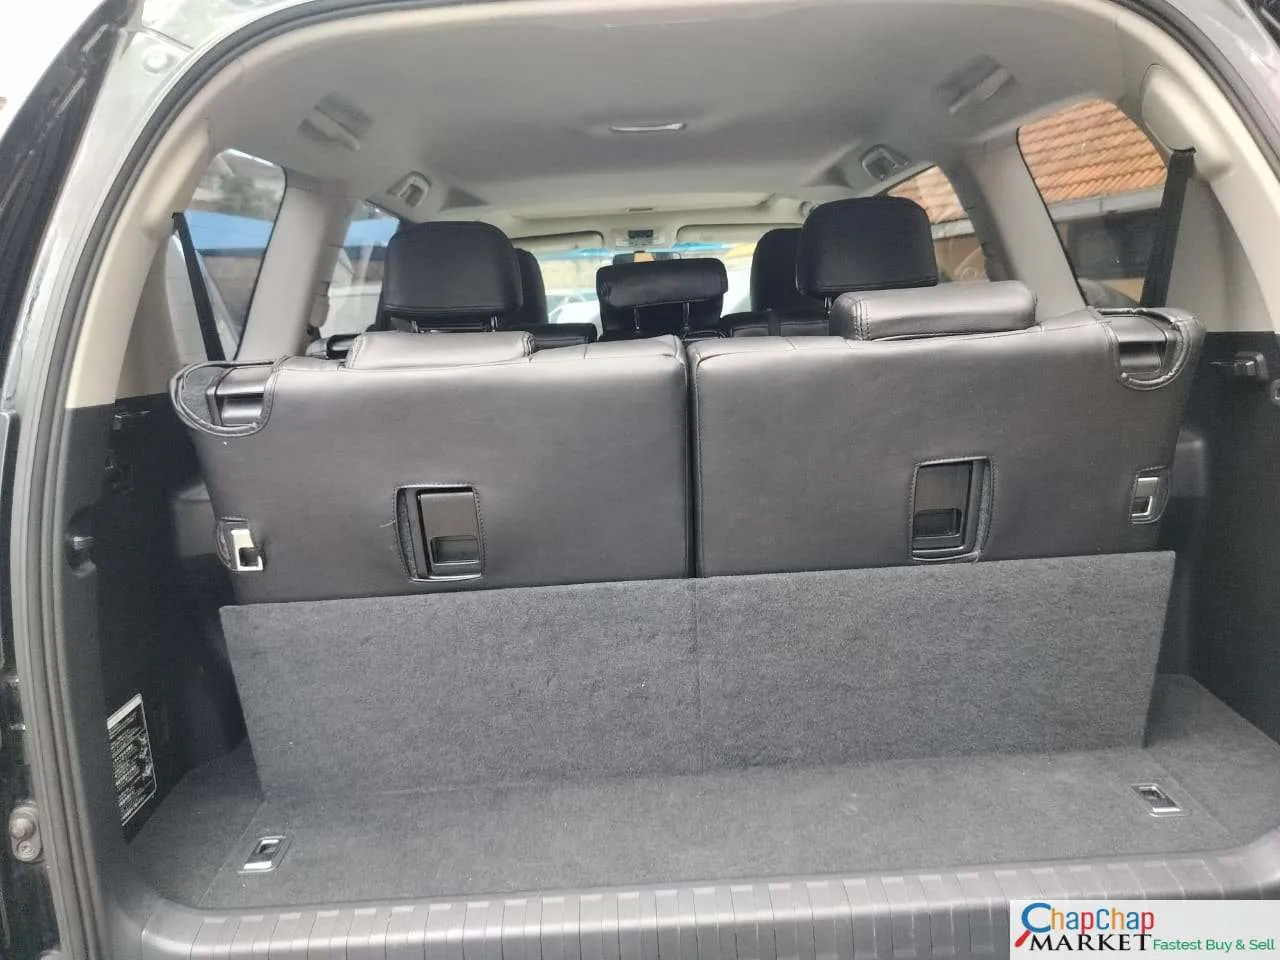 Toyota PRADO for sale in Kenya Sunroof Quick SALE TRADE IN OK EXCLUSIVE! Hire purchase installments 2017